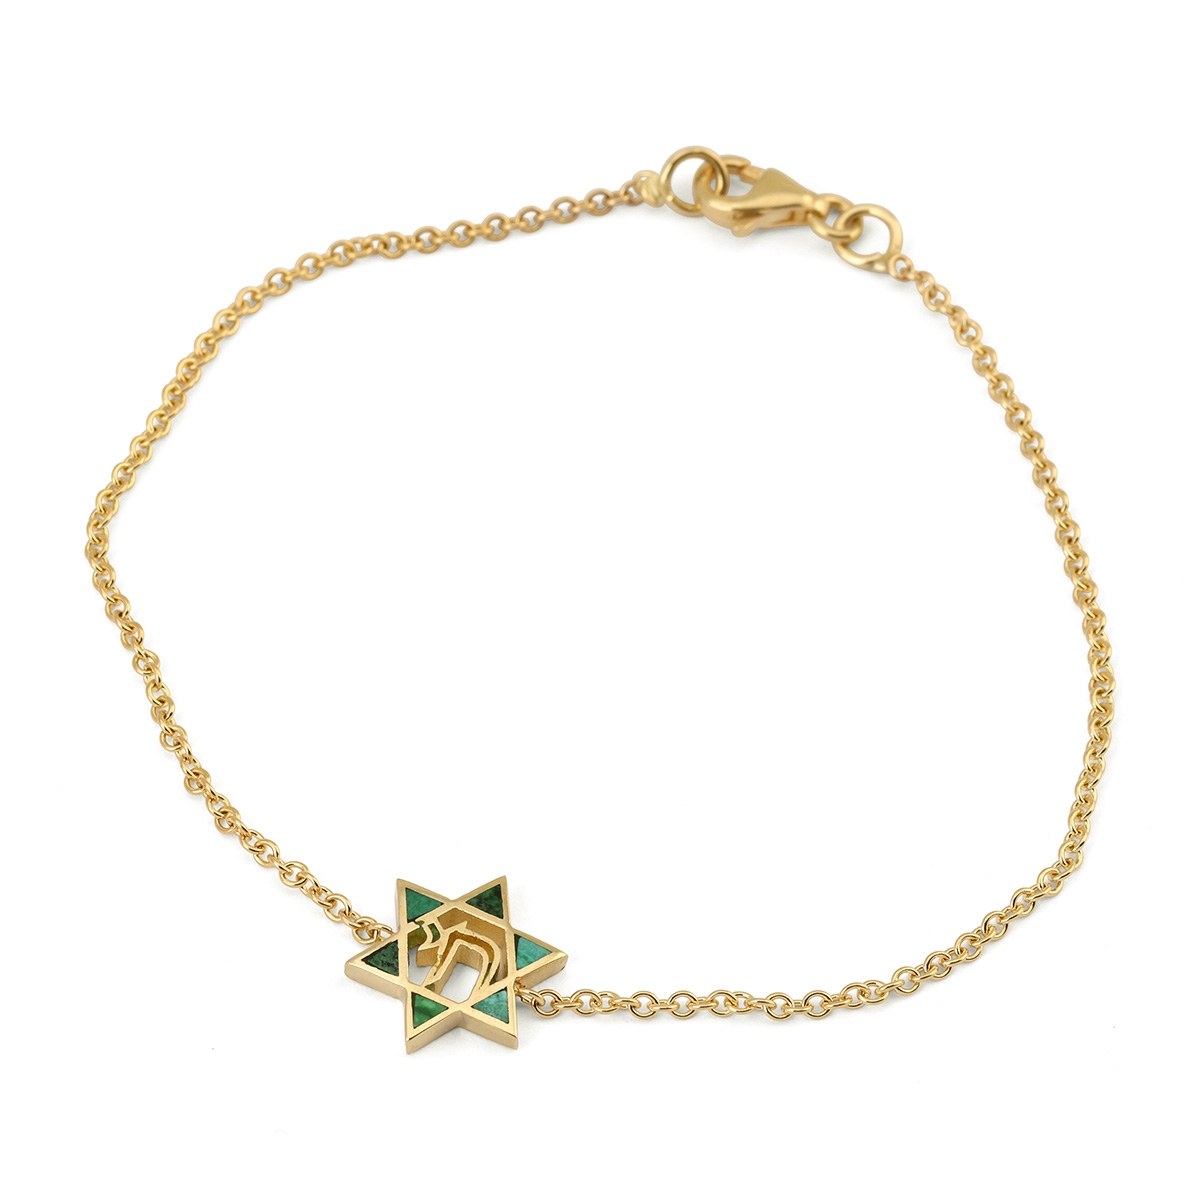 Dainty 14K Yellow Gold Star of David and Chai Chain Bracelet with Eilat Stone - 1